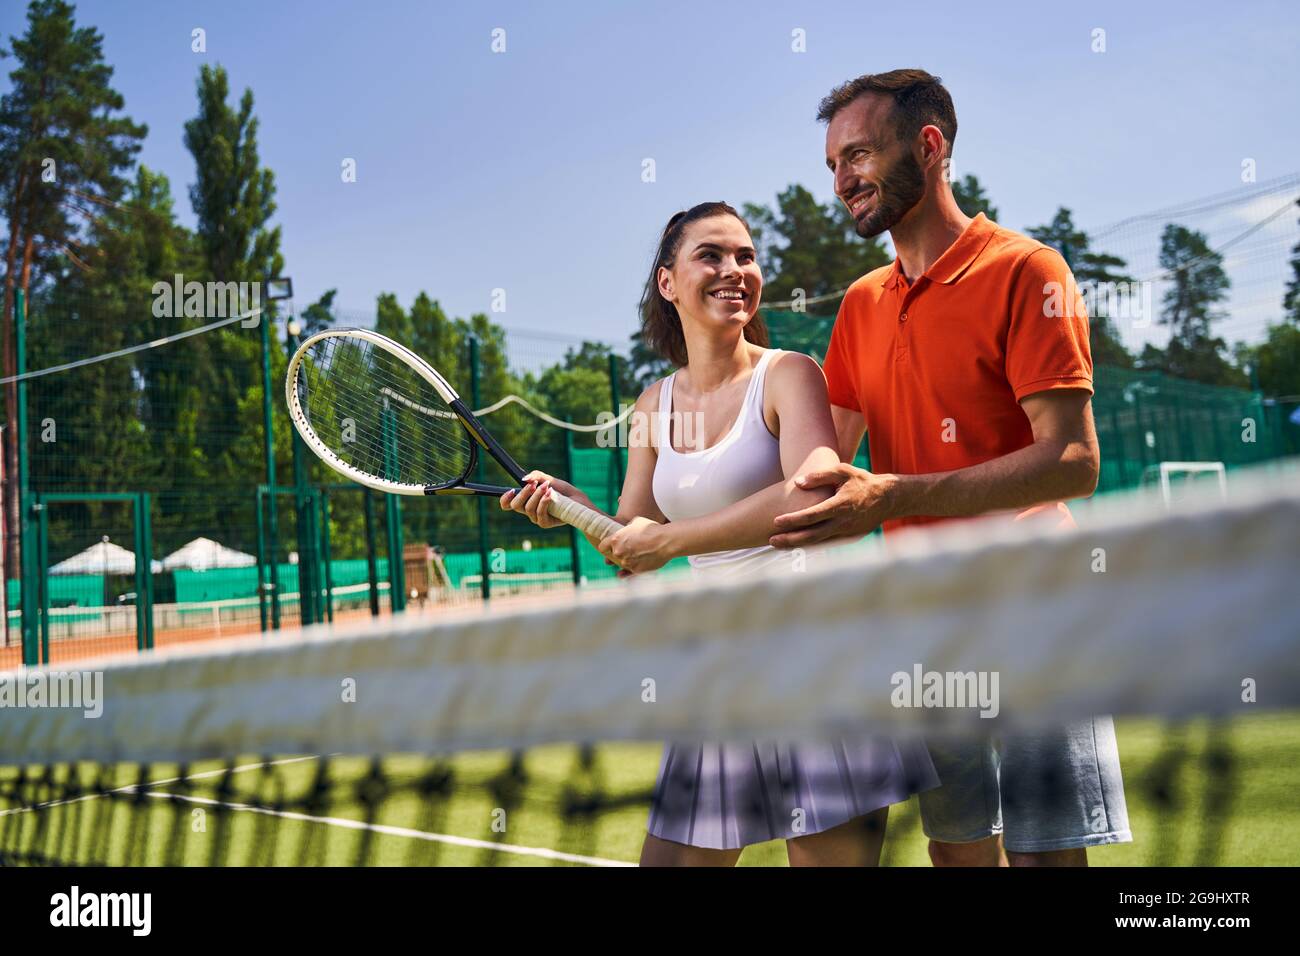 Woman learning a proper serve stance during the tennis session Stock Photo